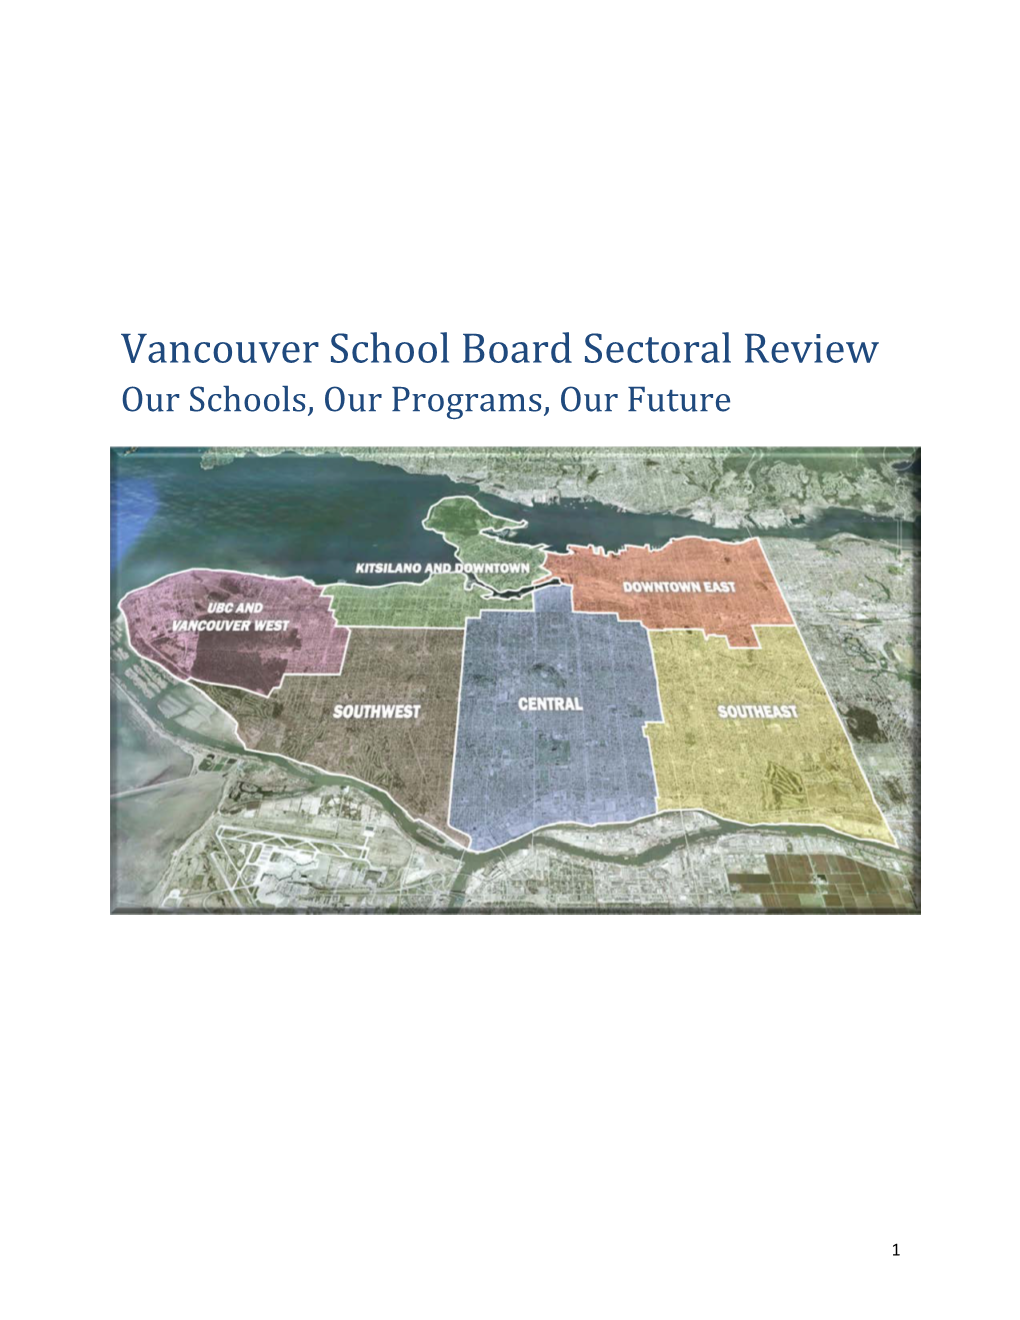 Vancouver School Board Sectoral Review Our Schools, Our Programs, Our Future